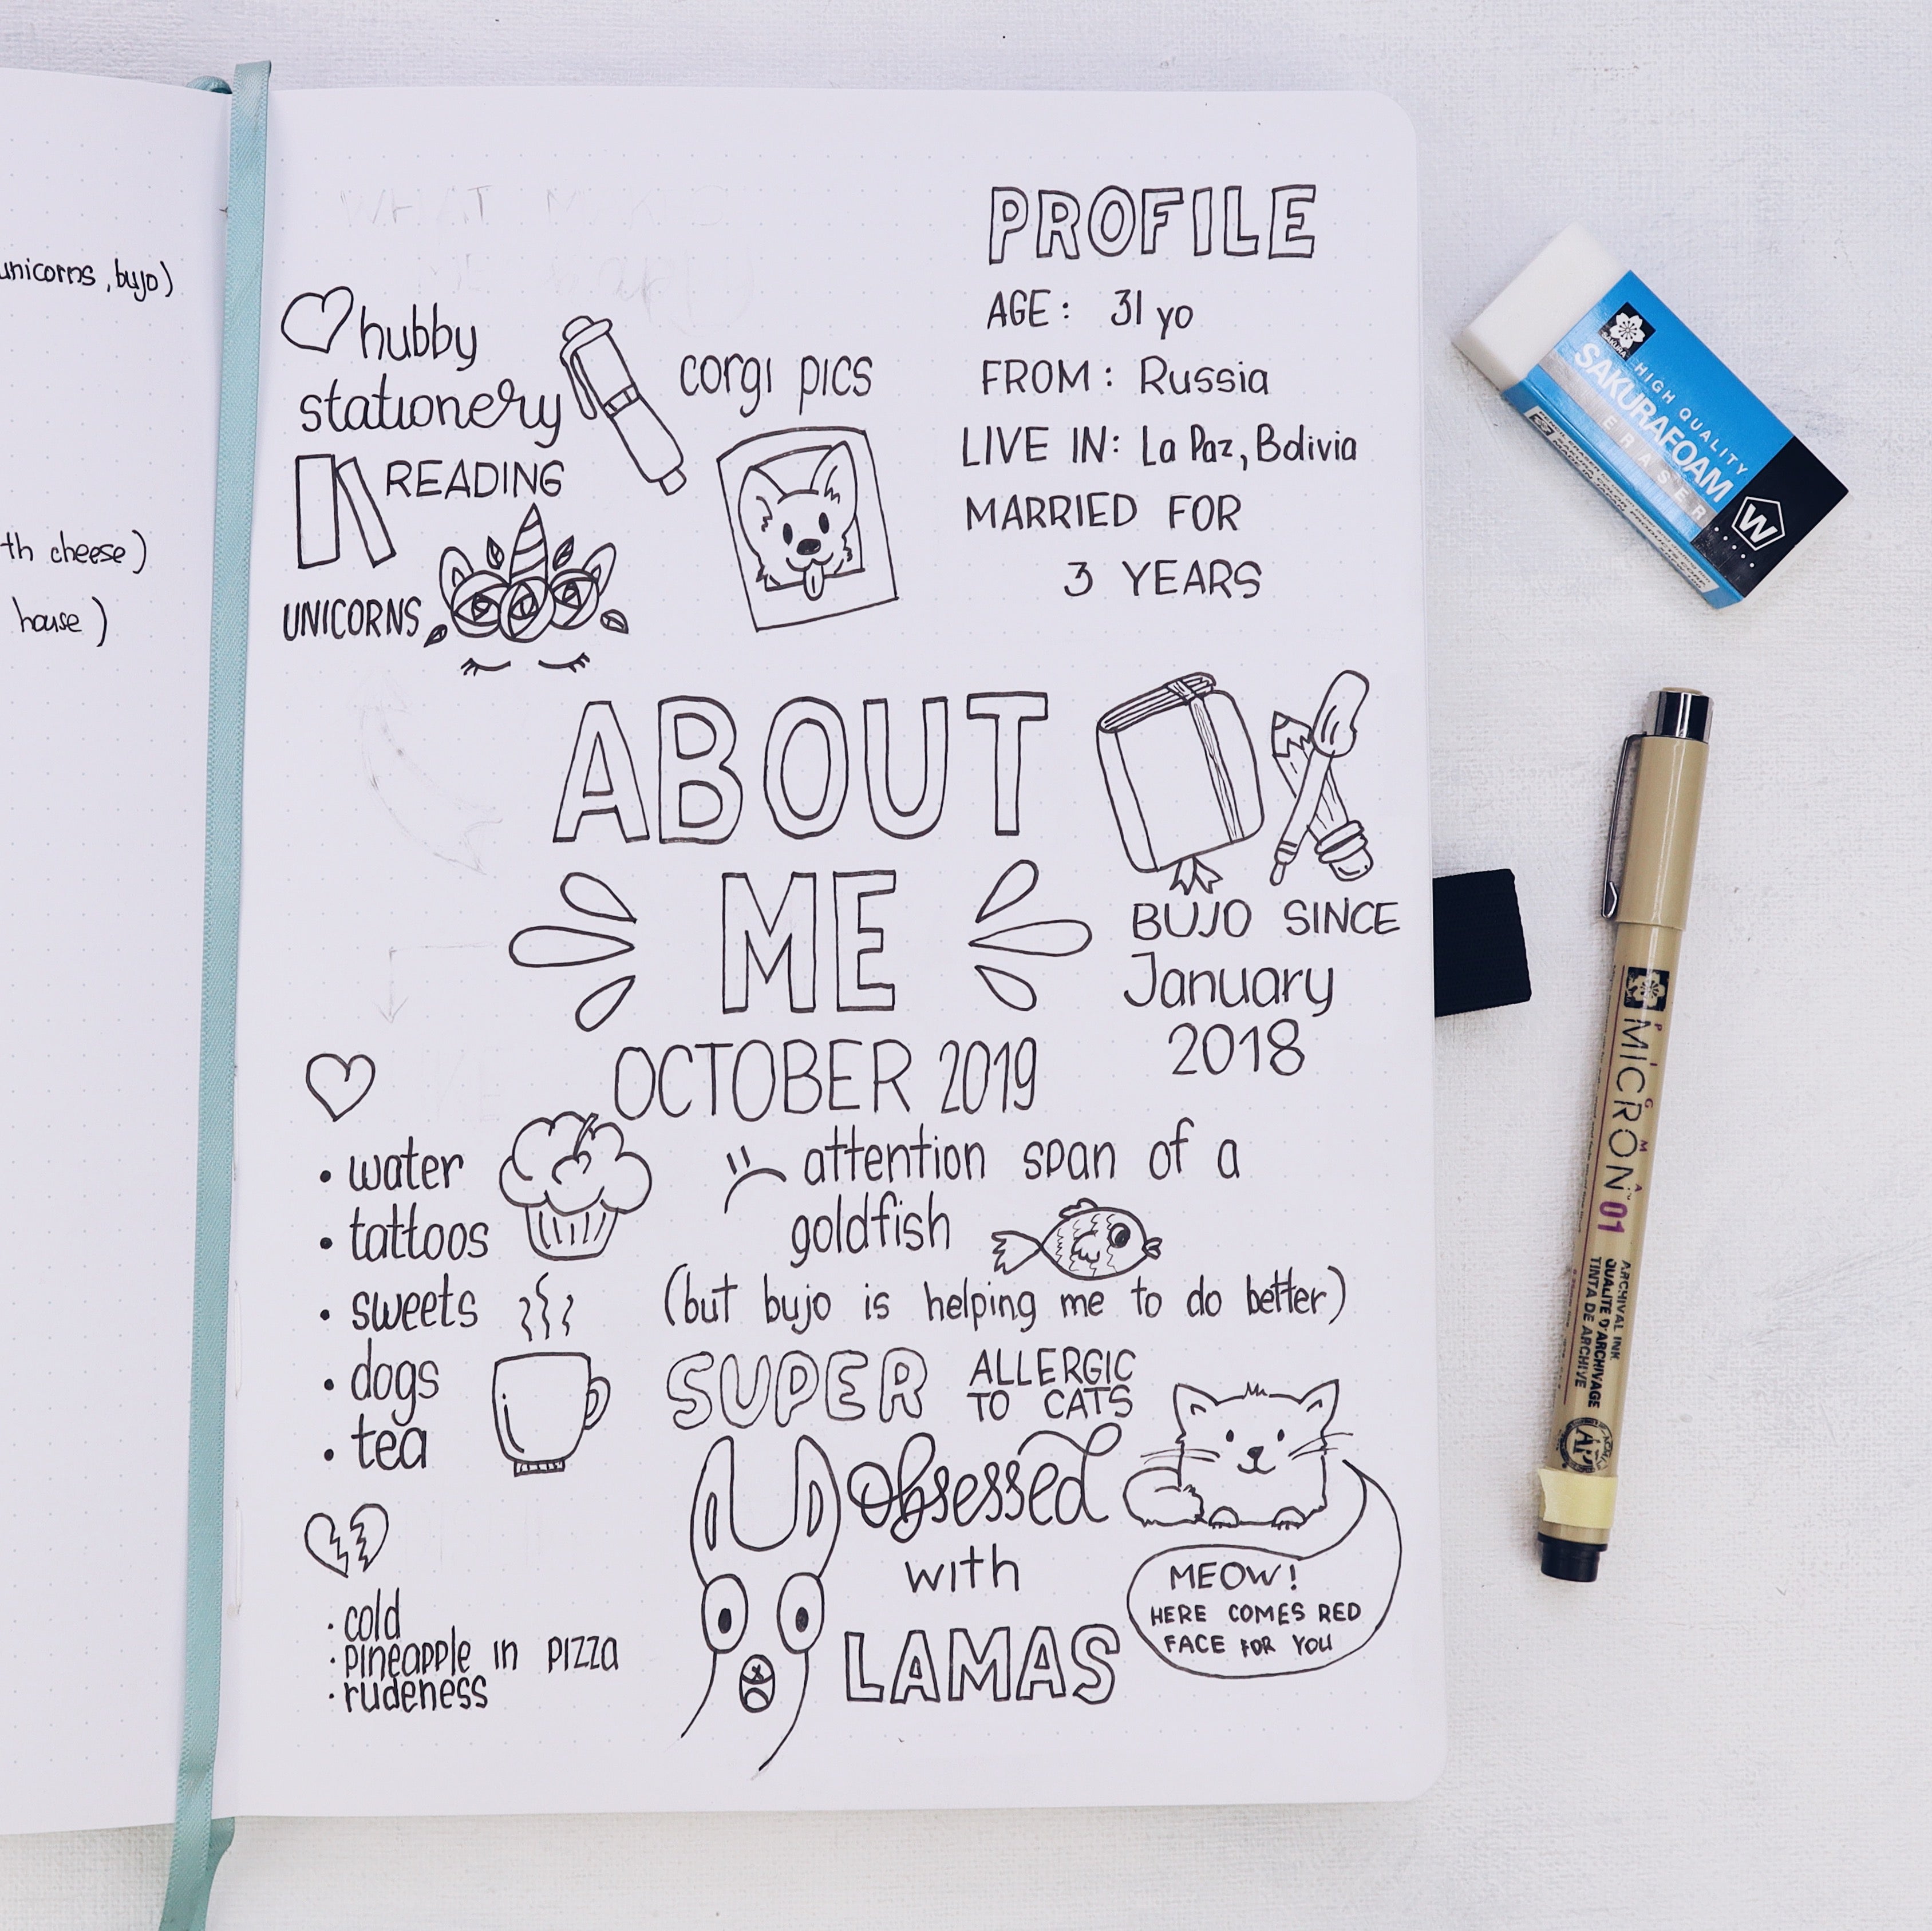 How To Create an About Me Page In Your Bullet Journal